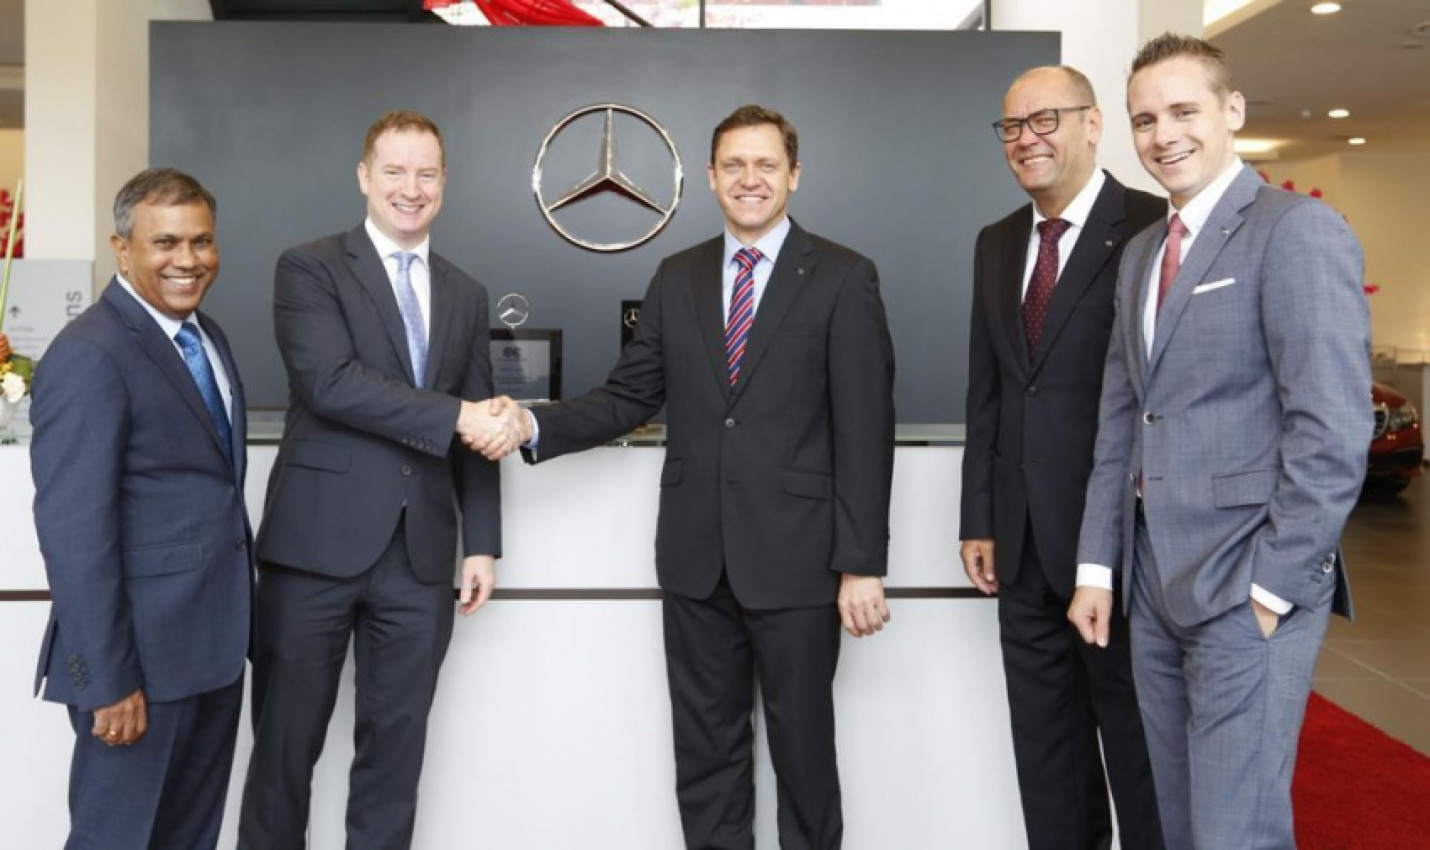 autos, cars, mercedes-benz, auto news, ccb, cheras autohaus, cycle & carriage, cycle & carriage bintang, mercedes, mercedes-benz cycle & carriage bintang cheras autohaus, mercedes-benz malaysia, mercedes-benz cycle & carriage bintang cheras autohaus is now open for business